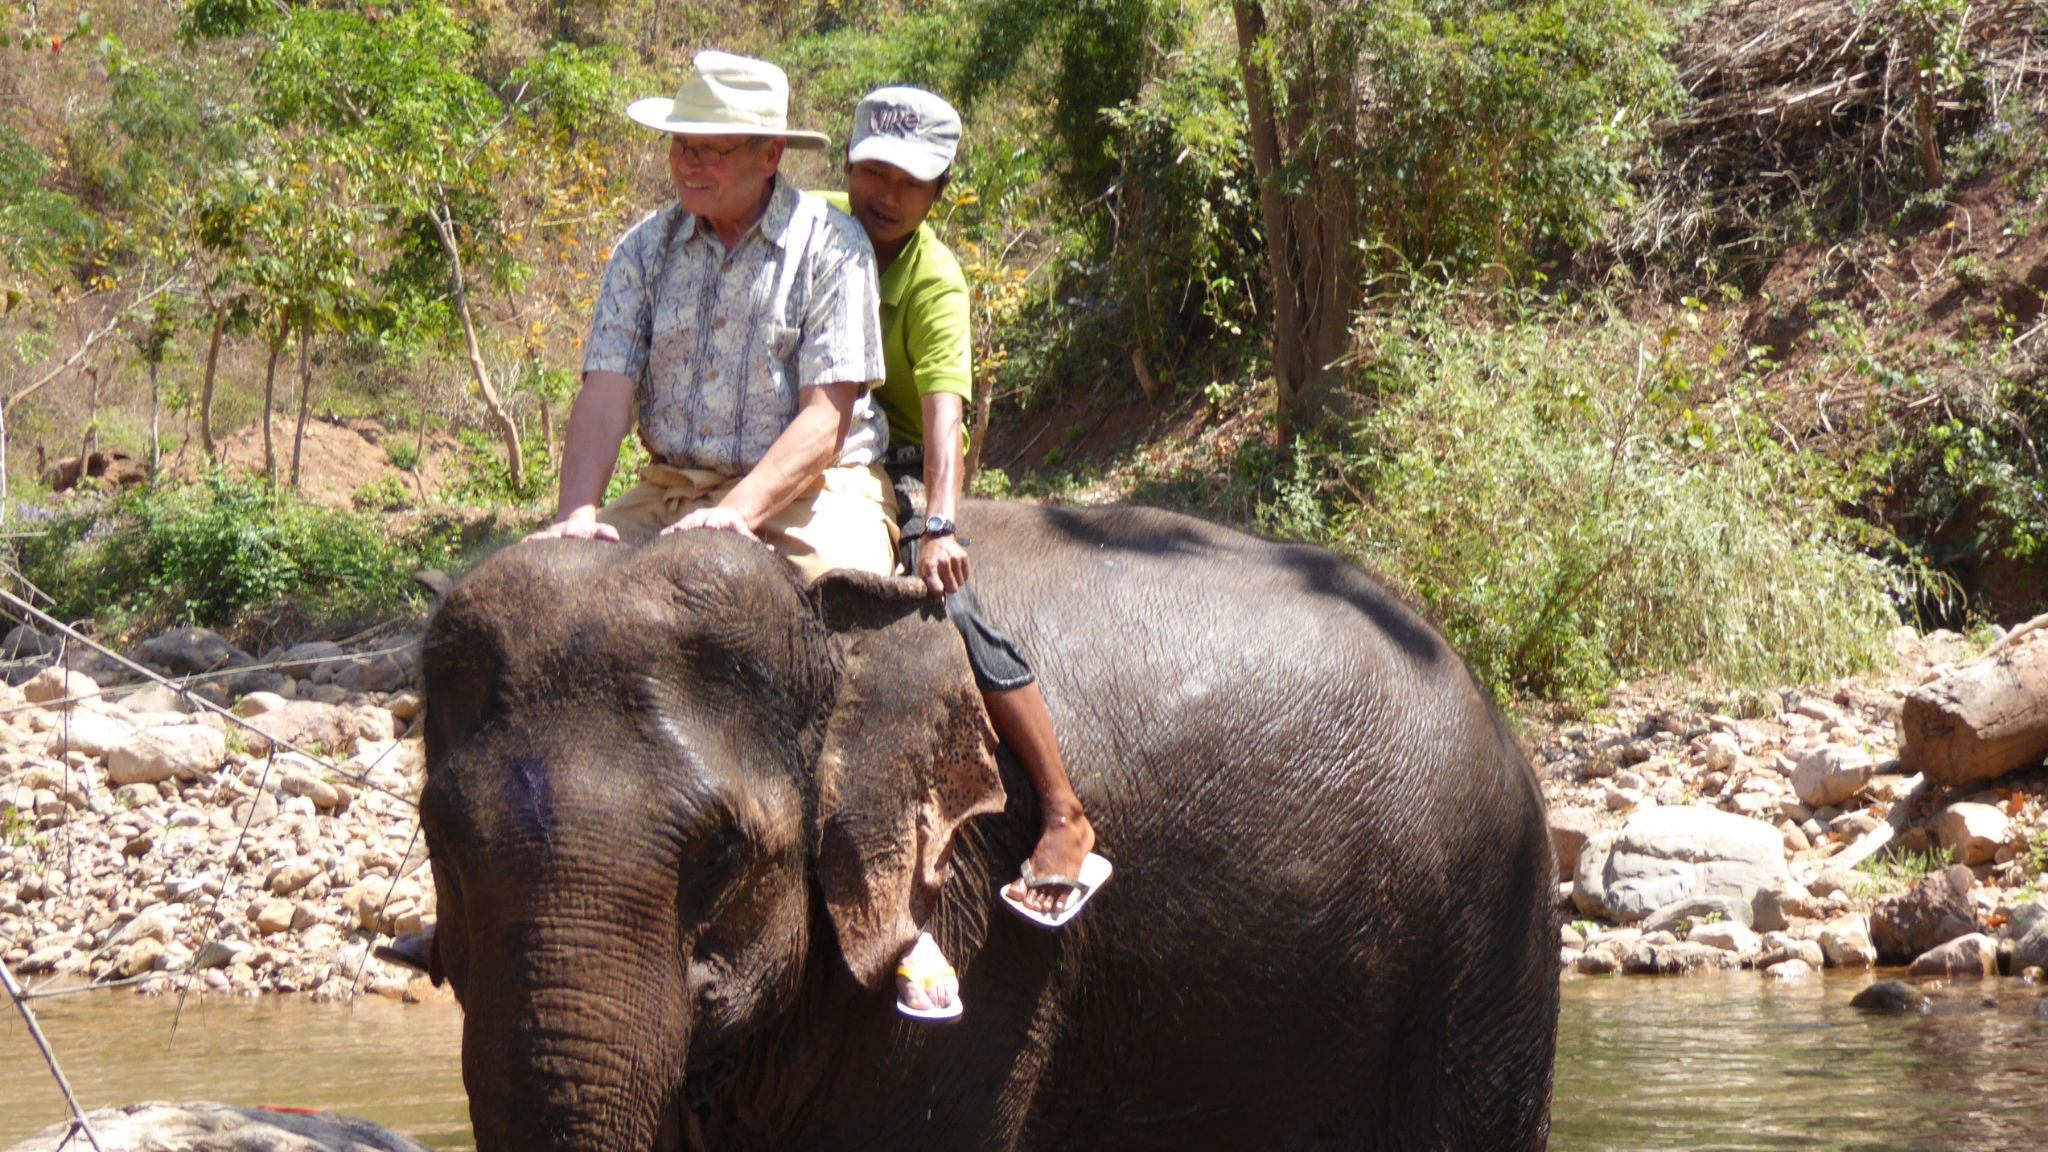 Day 6 Enjoy A Respectful Interaction With Elephants, Earning About Their Behavior